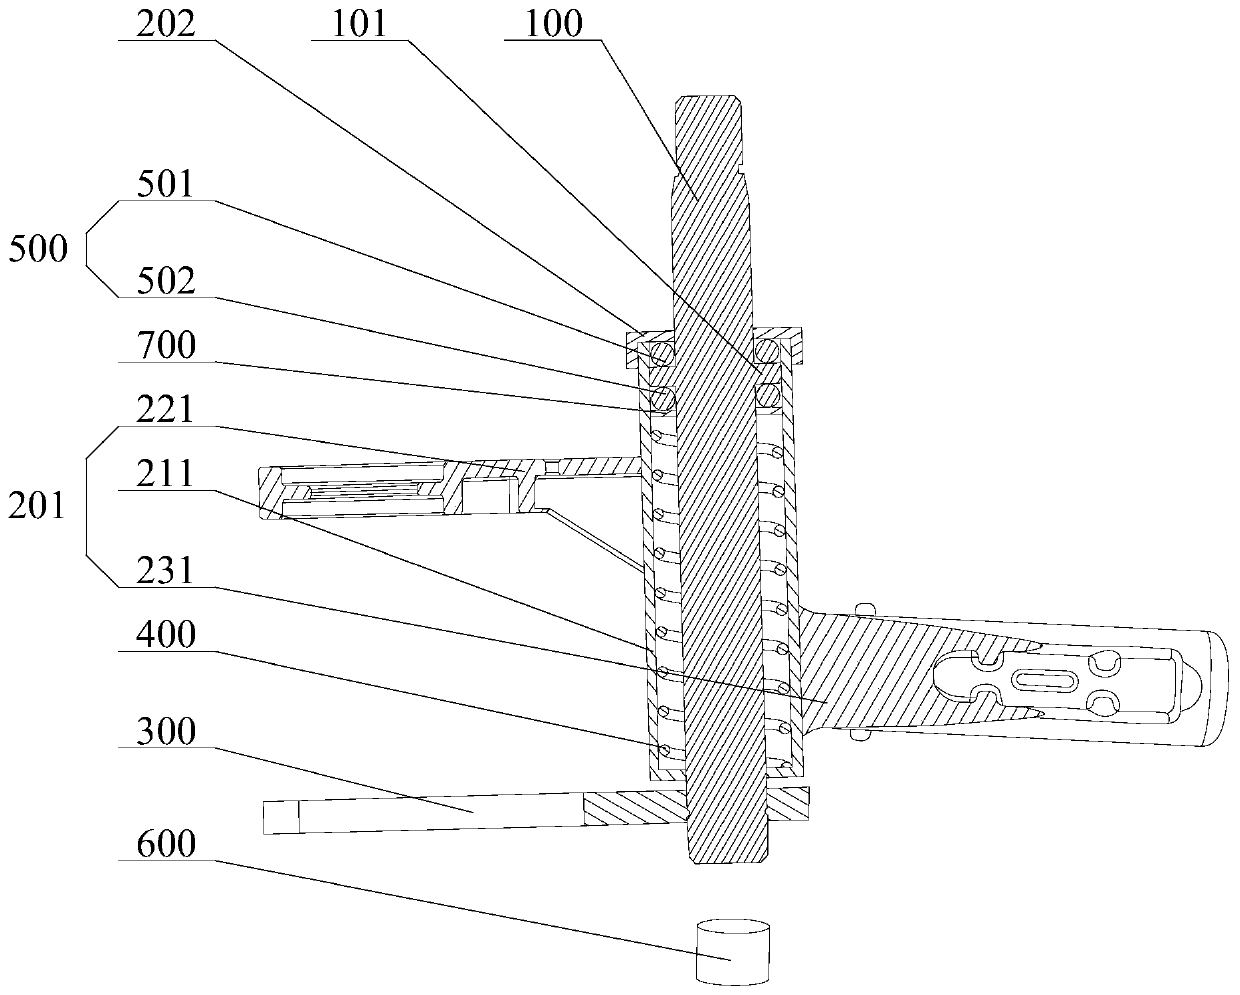 Wiper shaft assembly structure and automobile